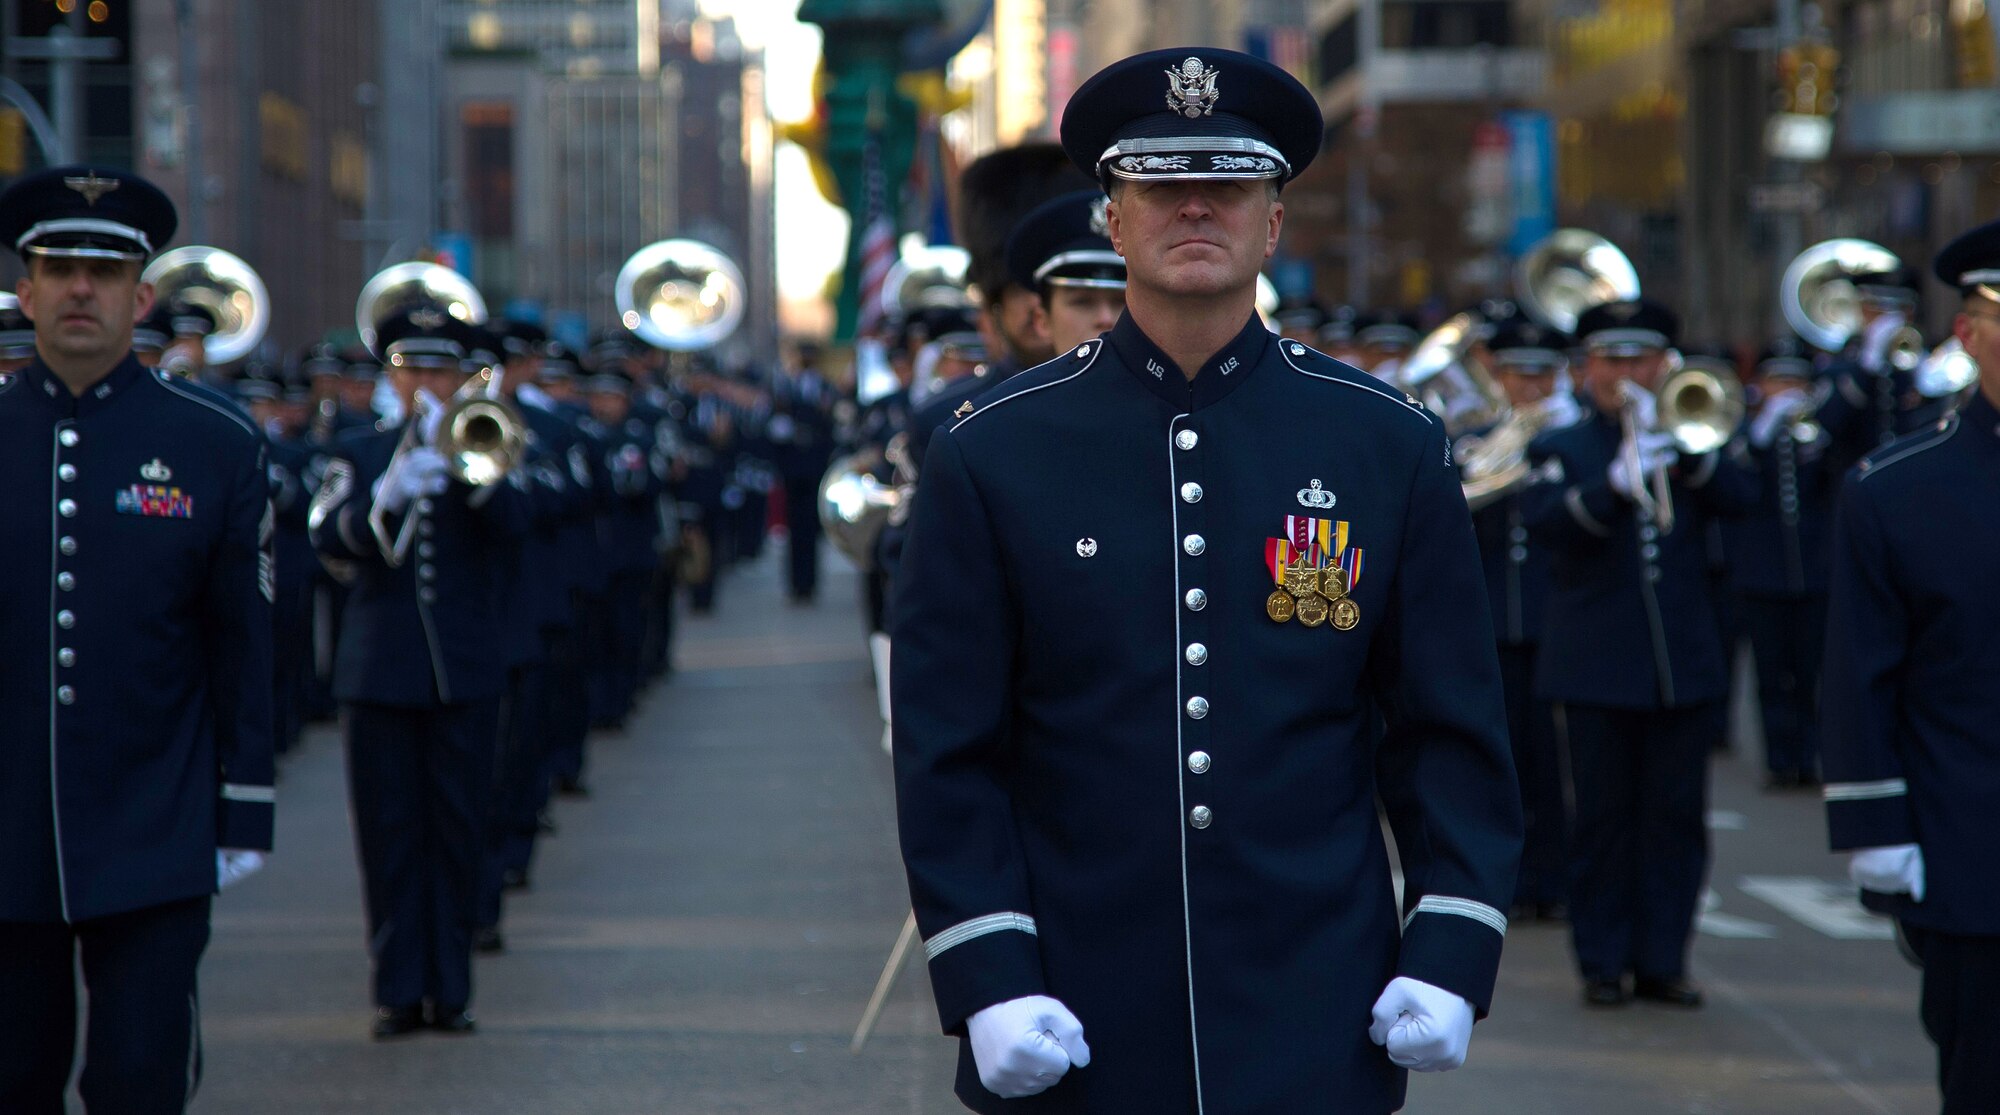 U.S. Air Force Band Commander Col. Larry Lang leads the USAF Band during the 86th Annual Macy's Thanksgiving Day Parade, Nov. 22, 2012, in New York City. Two hundred Airmen from the USAF Band and Honor Guard marched in the parade with a televised audience of 55 million viewers and live audience of more than three million spectators. (U.S. Air Force photo by Senior Airman Perry Aston)